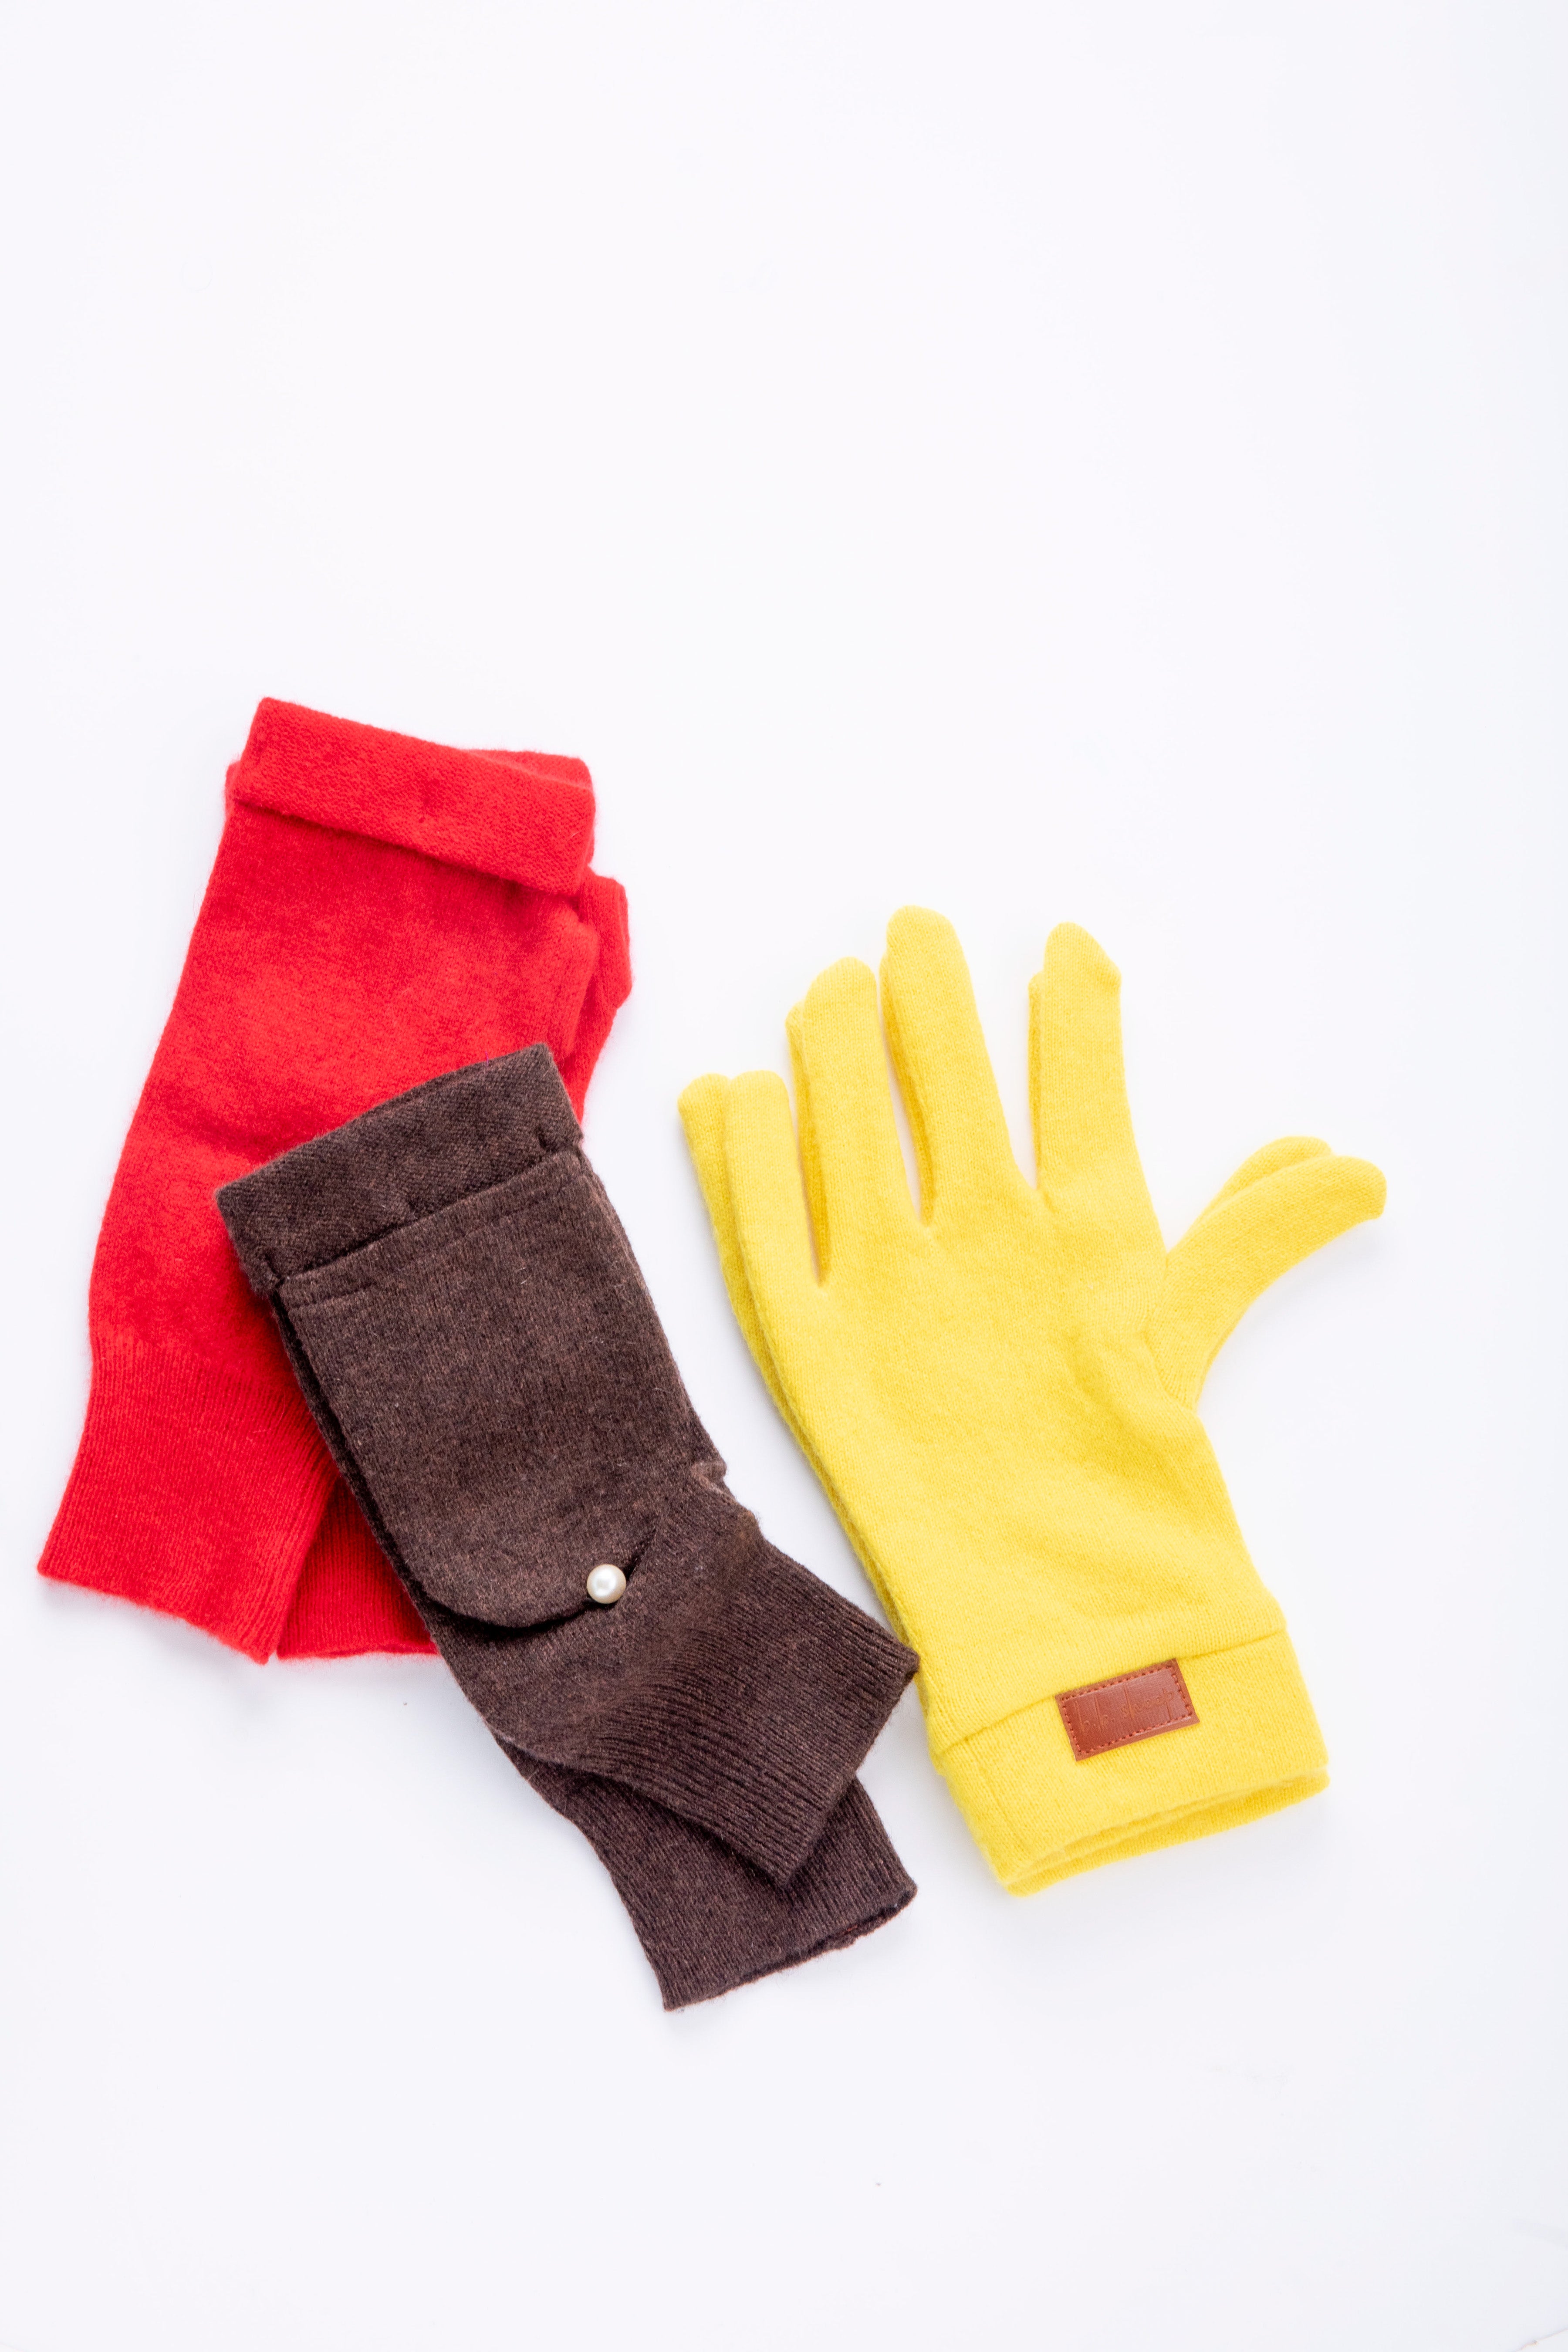 Autumn Assorted Gloves Set -Red, Yellow and Brown - Box of 3